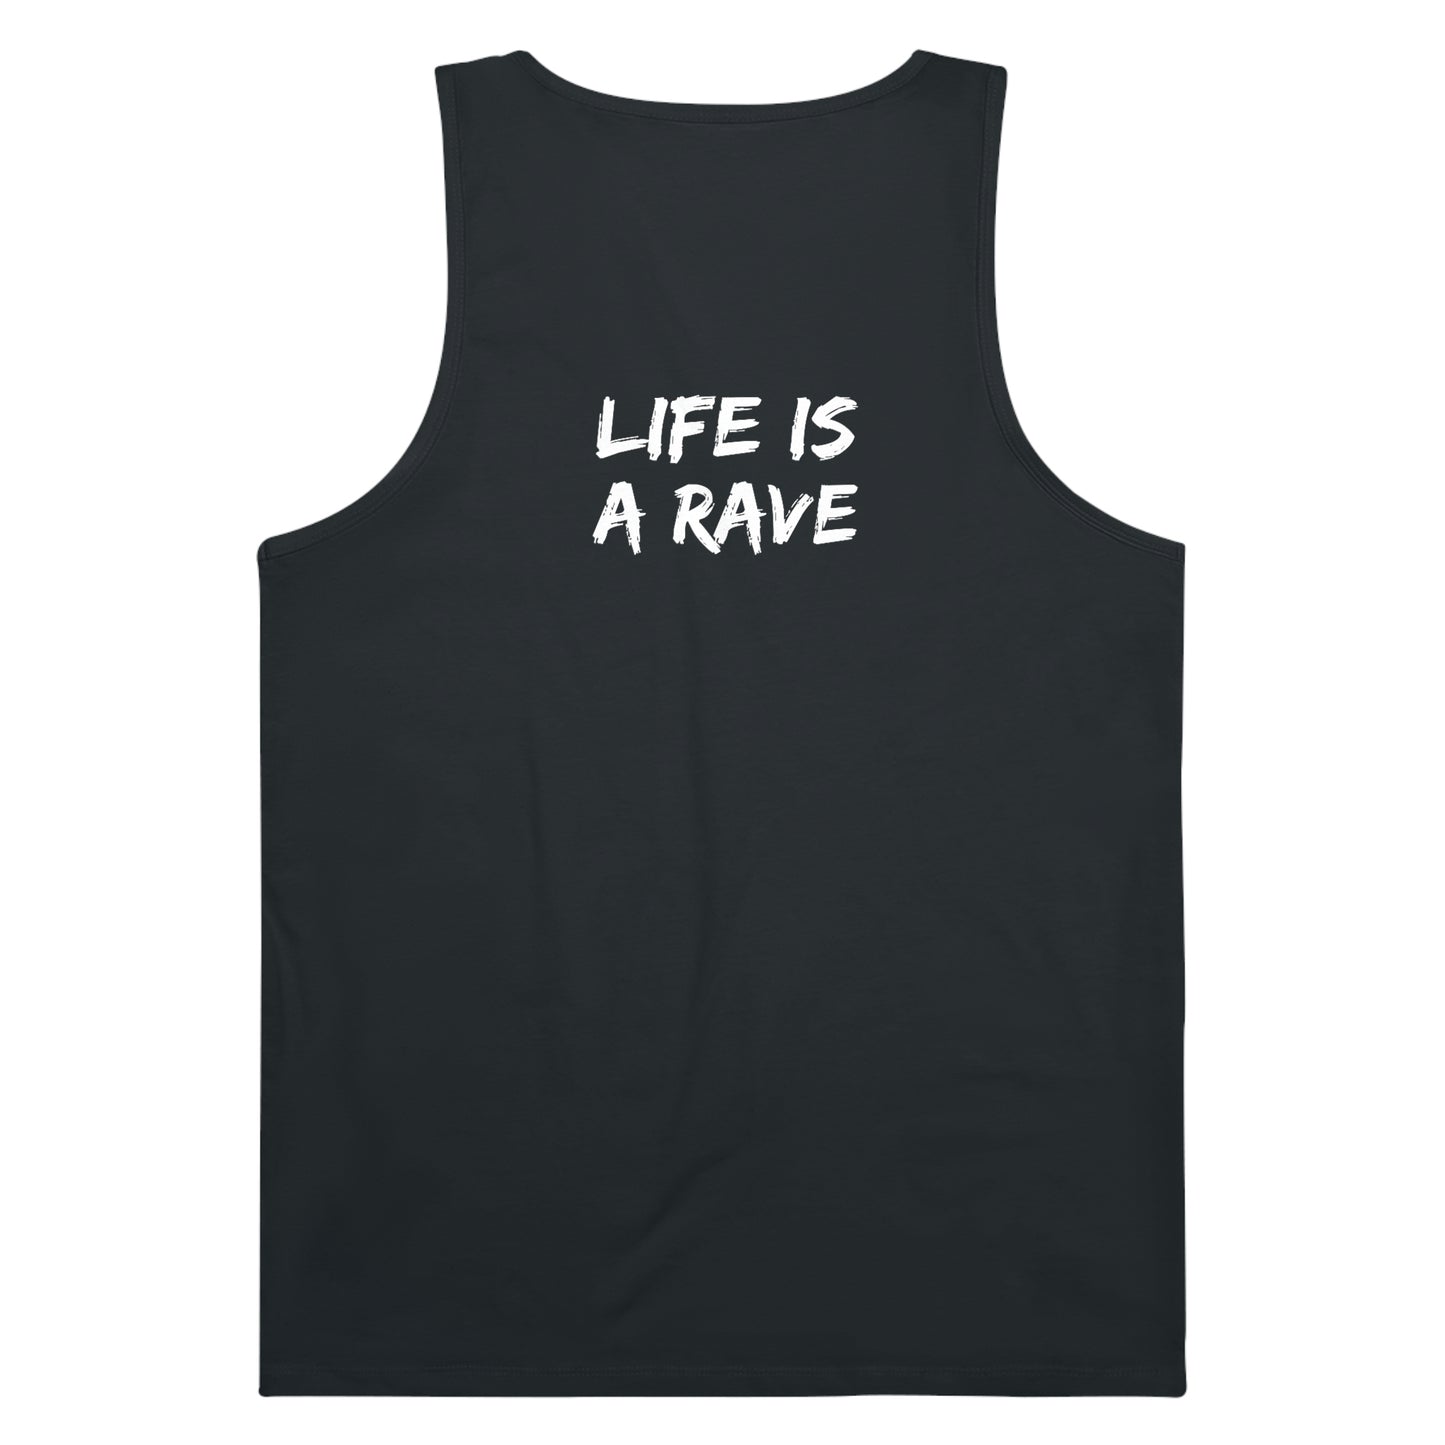 Life is a Rave - Men's Specter Tank Top